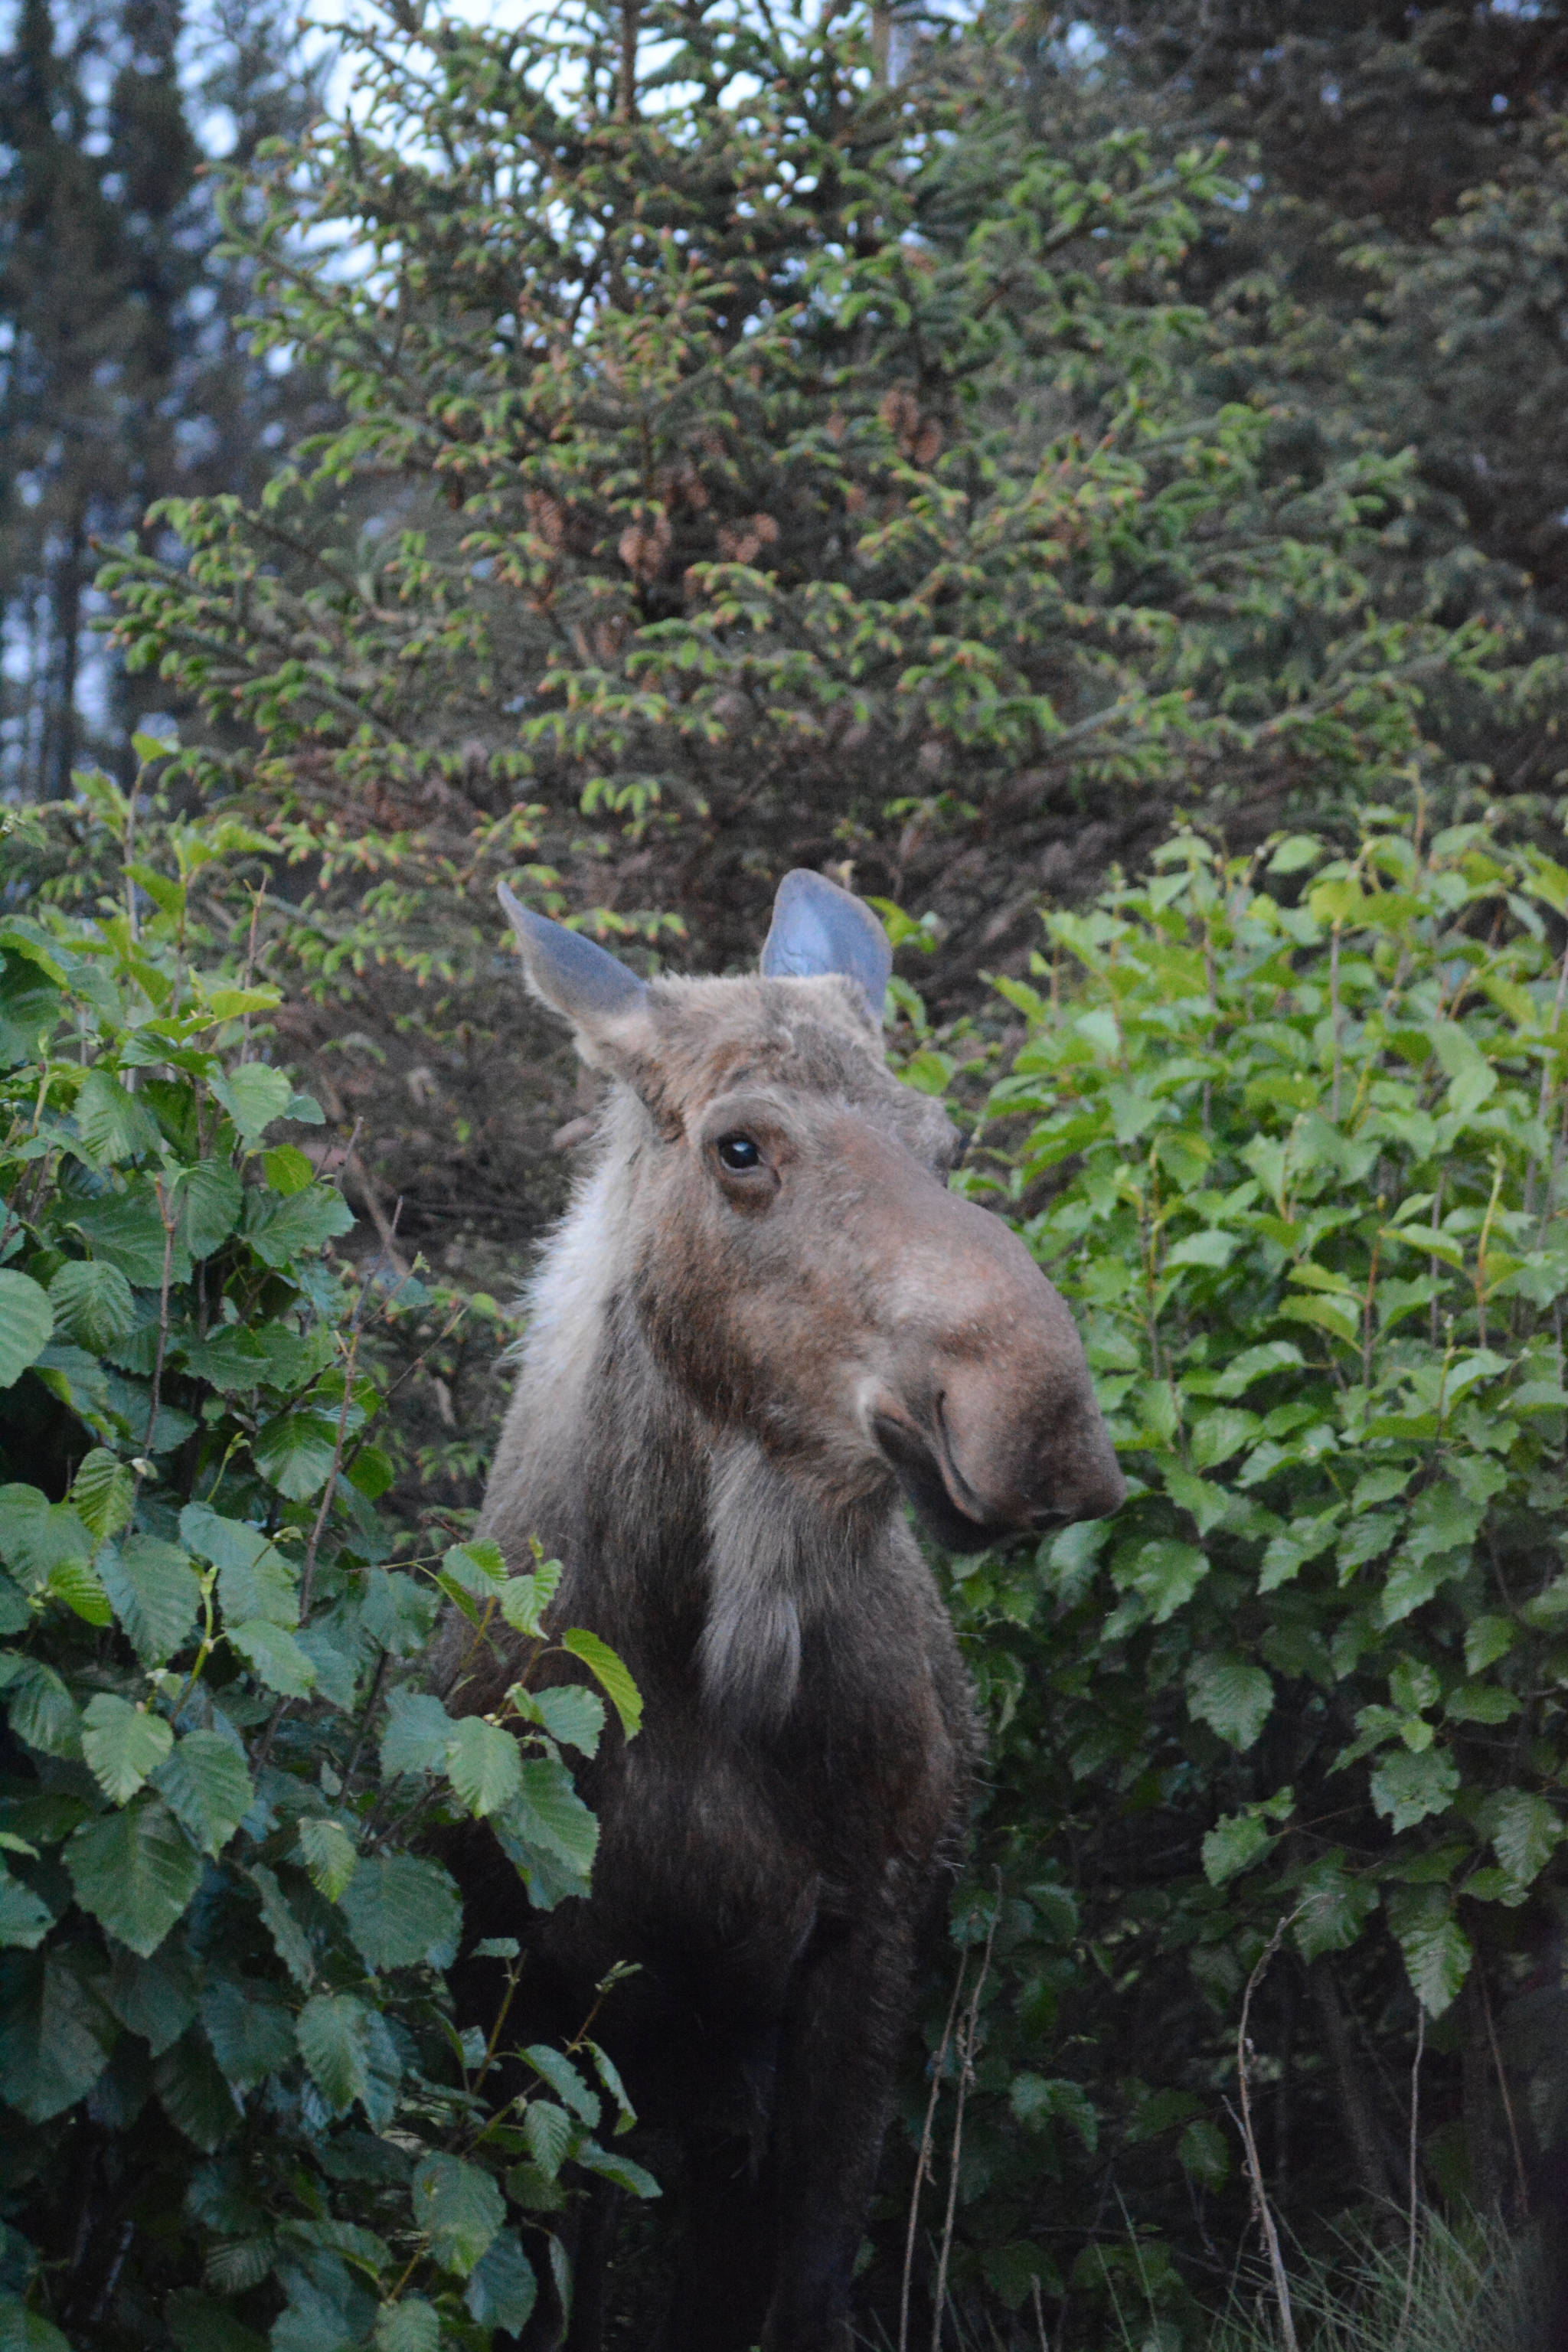 A moose browses on alder bushes by the Homer News last Tuesday evening.